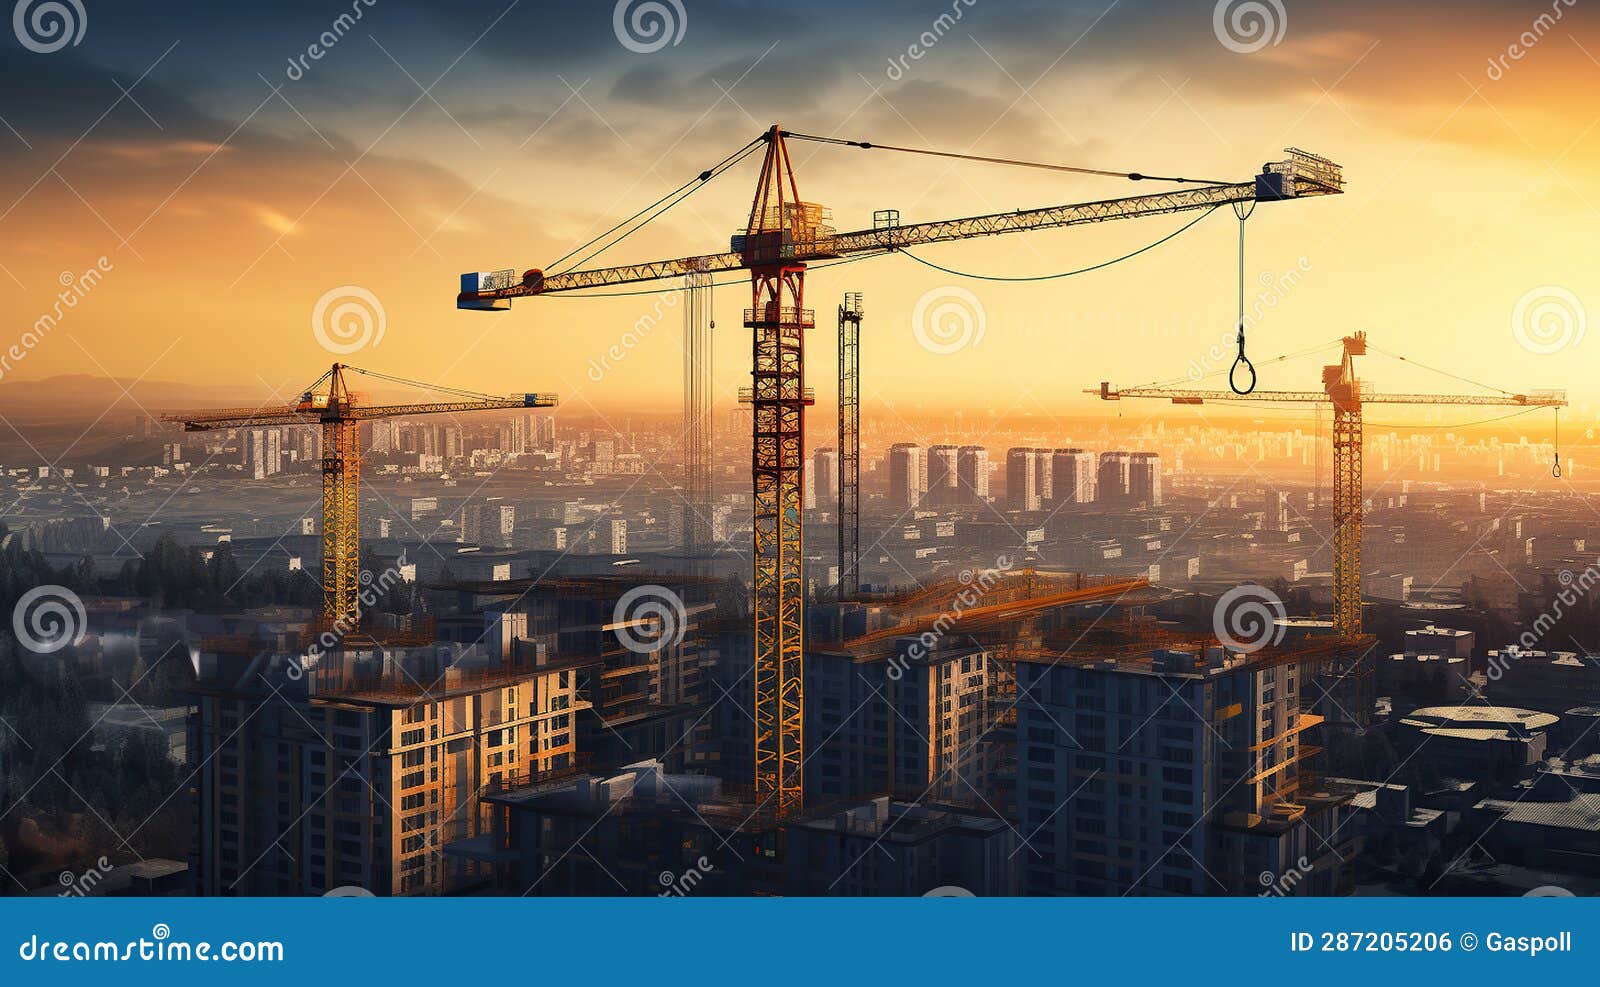 tall edifices graced by the presence of towering cranes